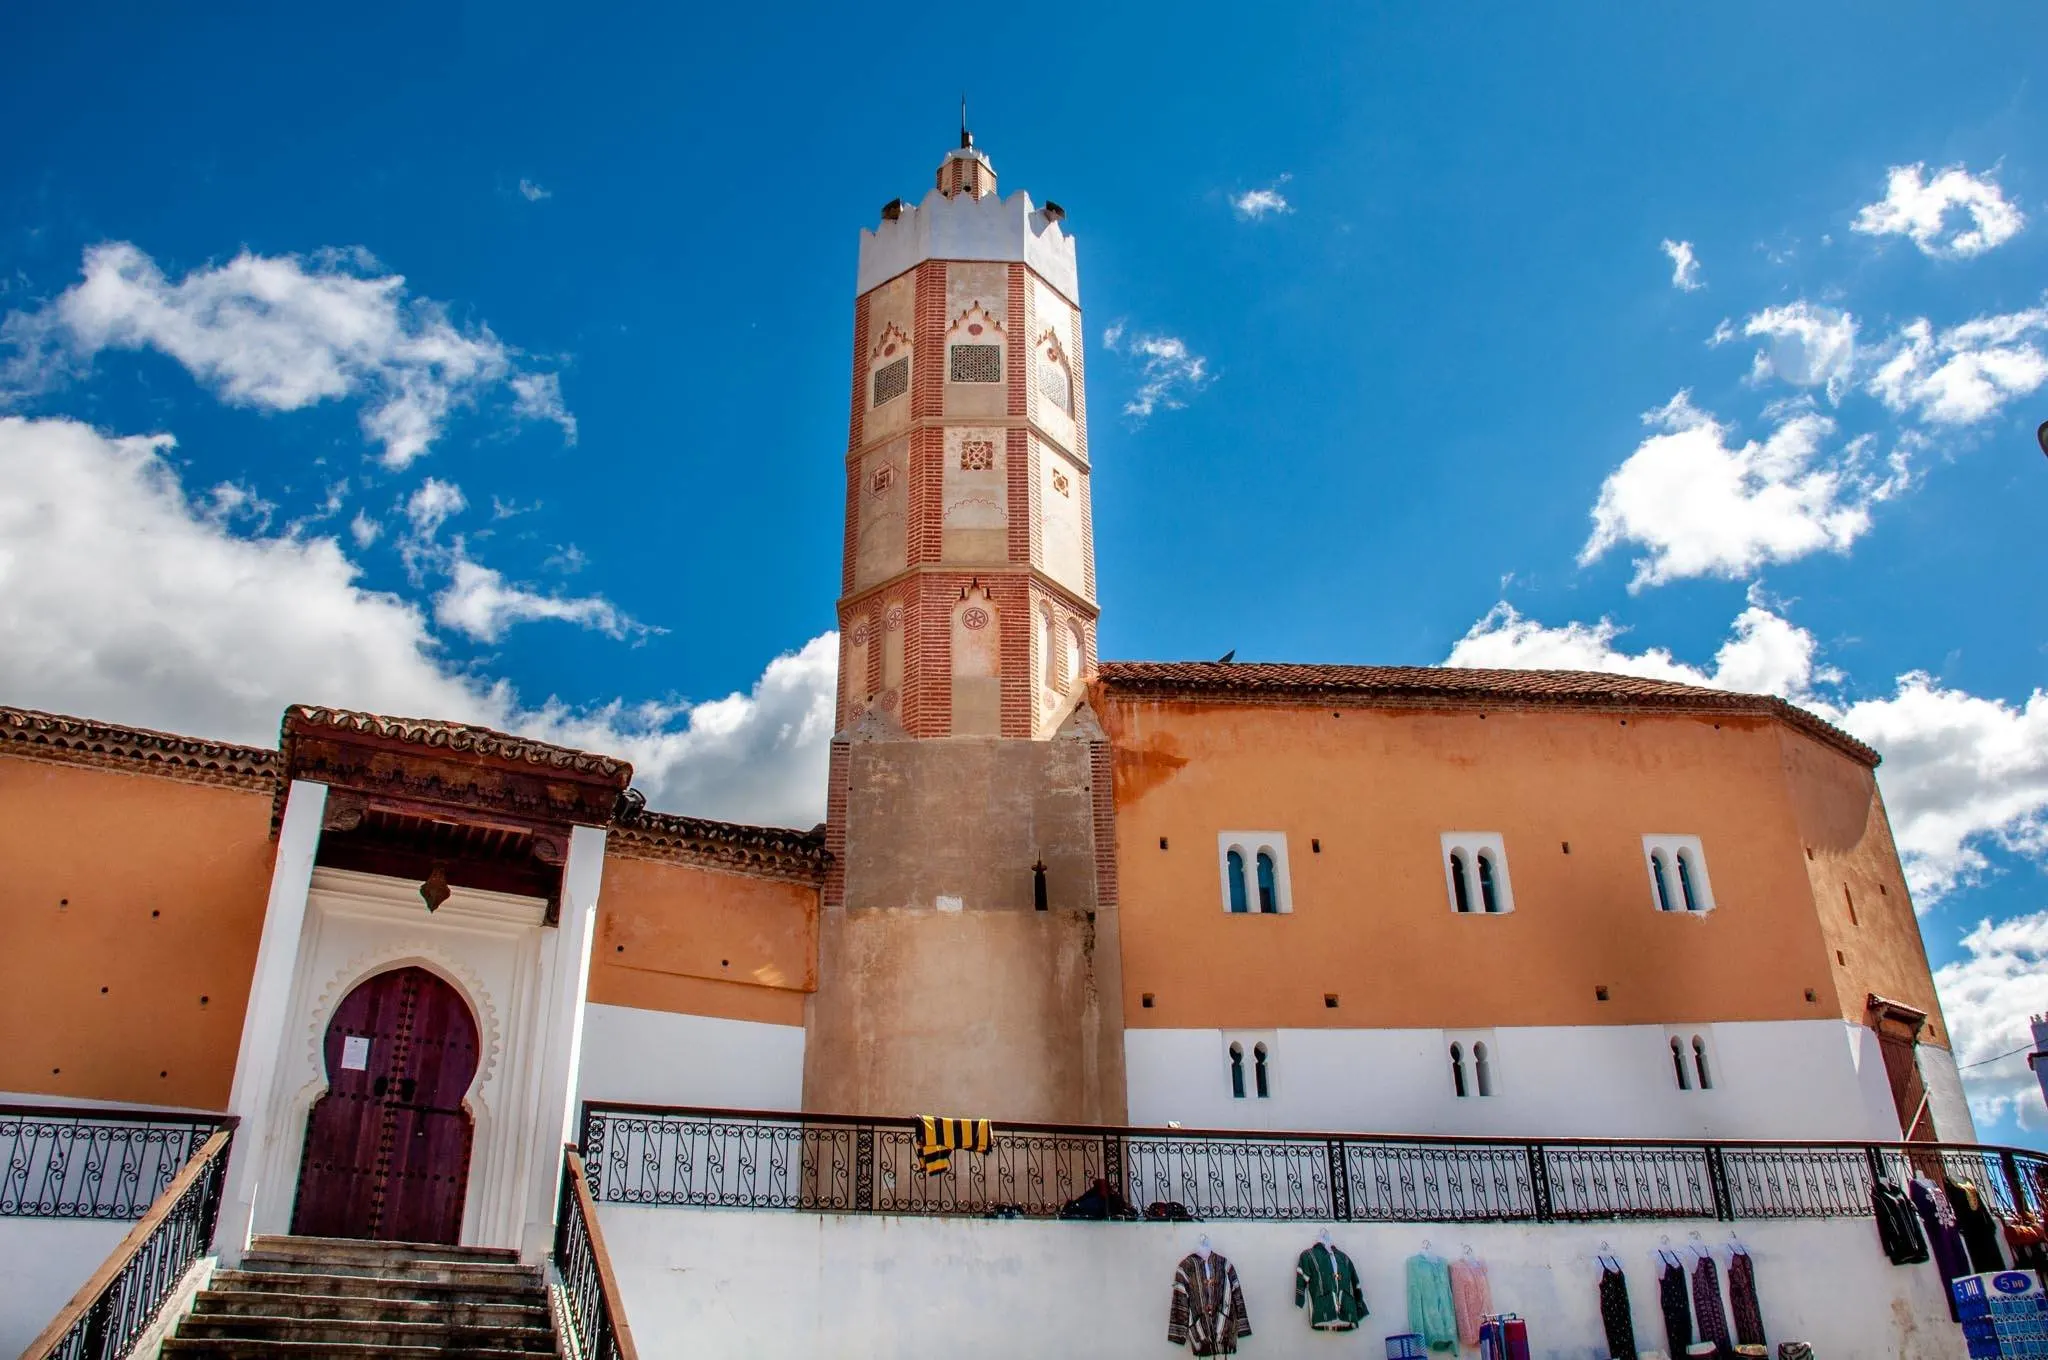 Orange building with a minaret, the Grand Mosque in Chefchaouen